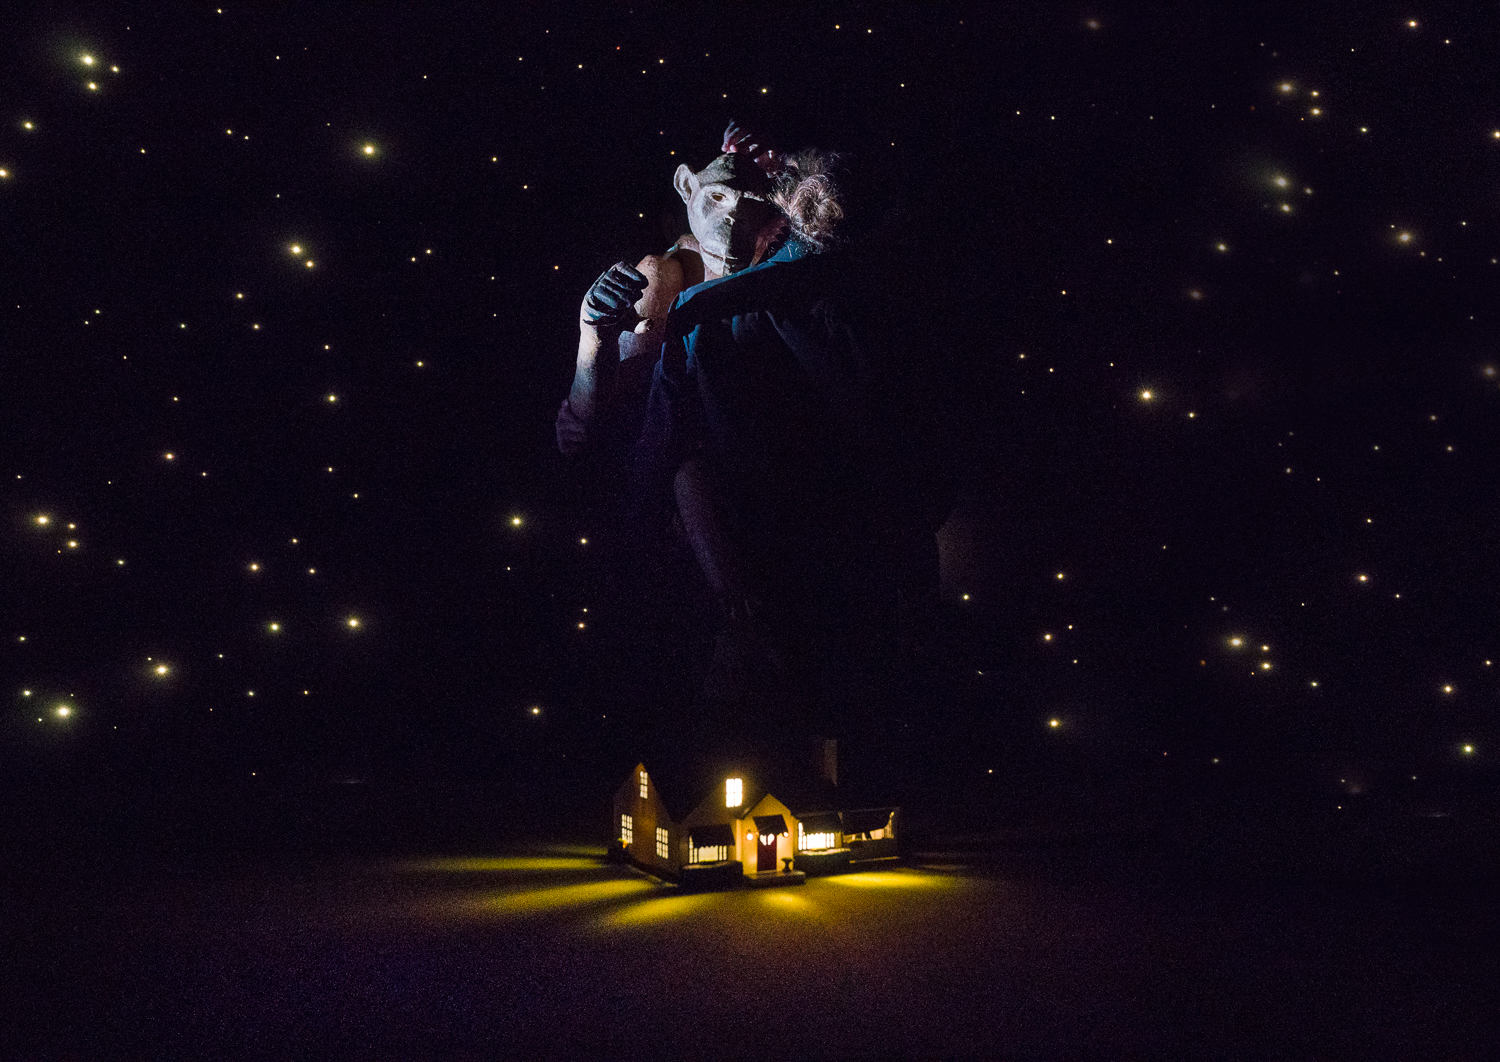 Image of chimpanzee puppet being held by a puppeteer with image of a house at night below them.